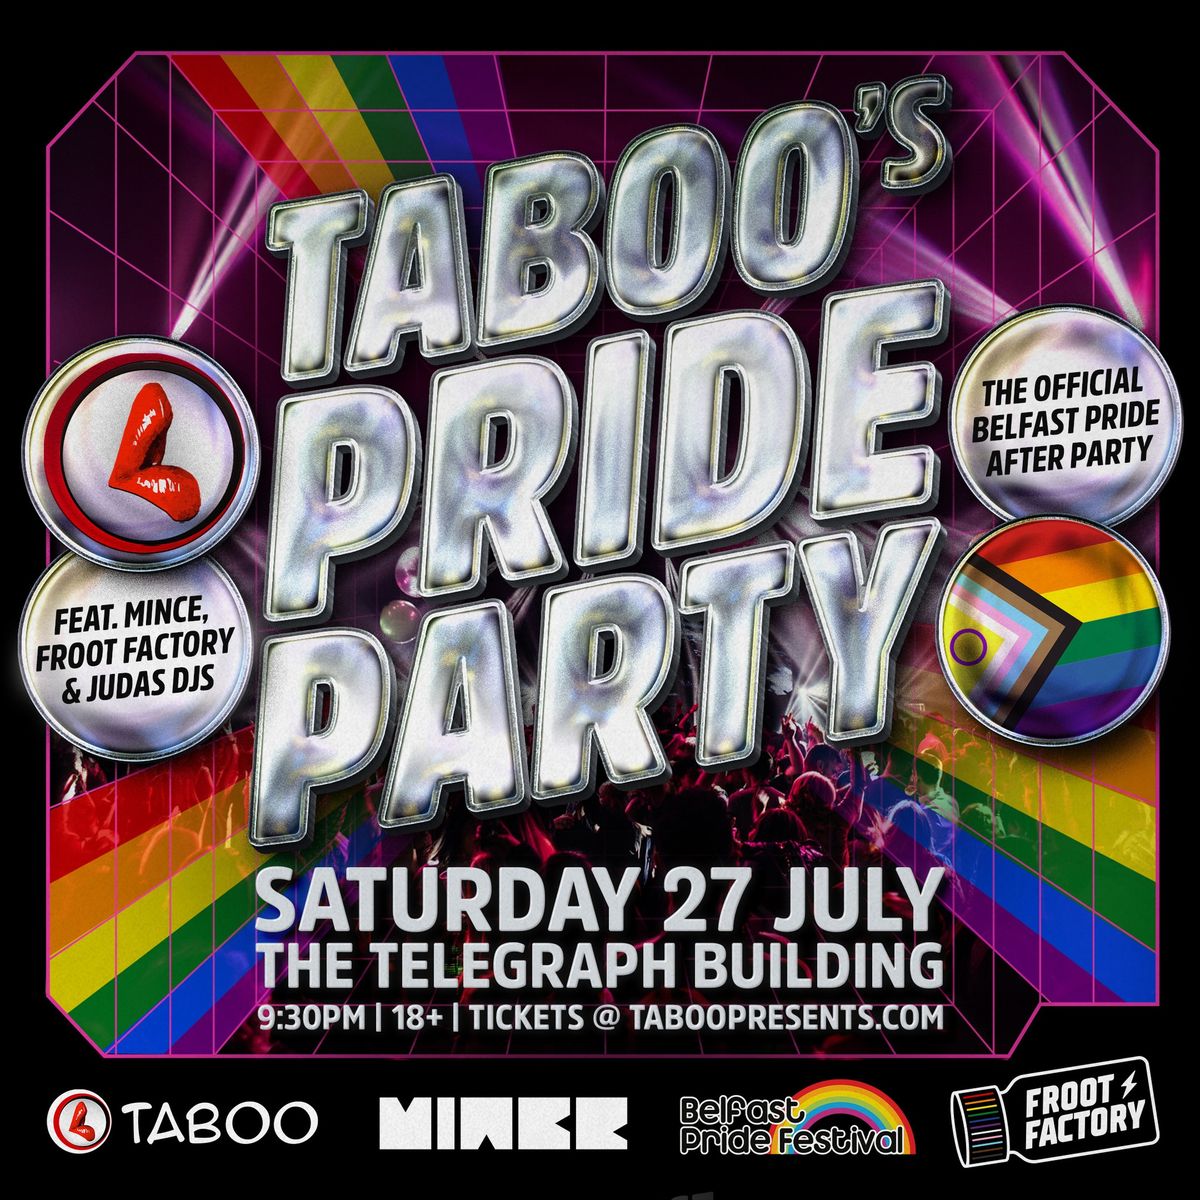 \ud83c\udff3\ufe0f\u200d\ud83c\udf08\ud83c\udff3\ufe0f\u200d\u26a7\ufe0f TABOO'S PRIDE PARTY: The Official Belfast Pride After Party - Tix On Sale Now!